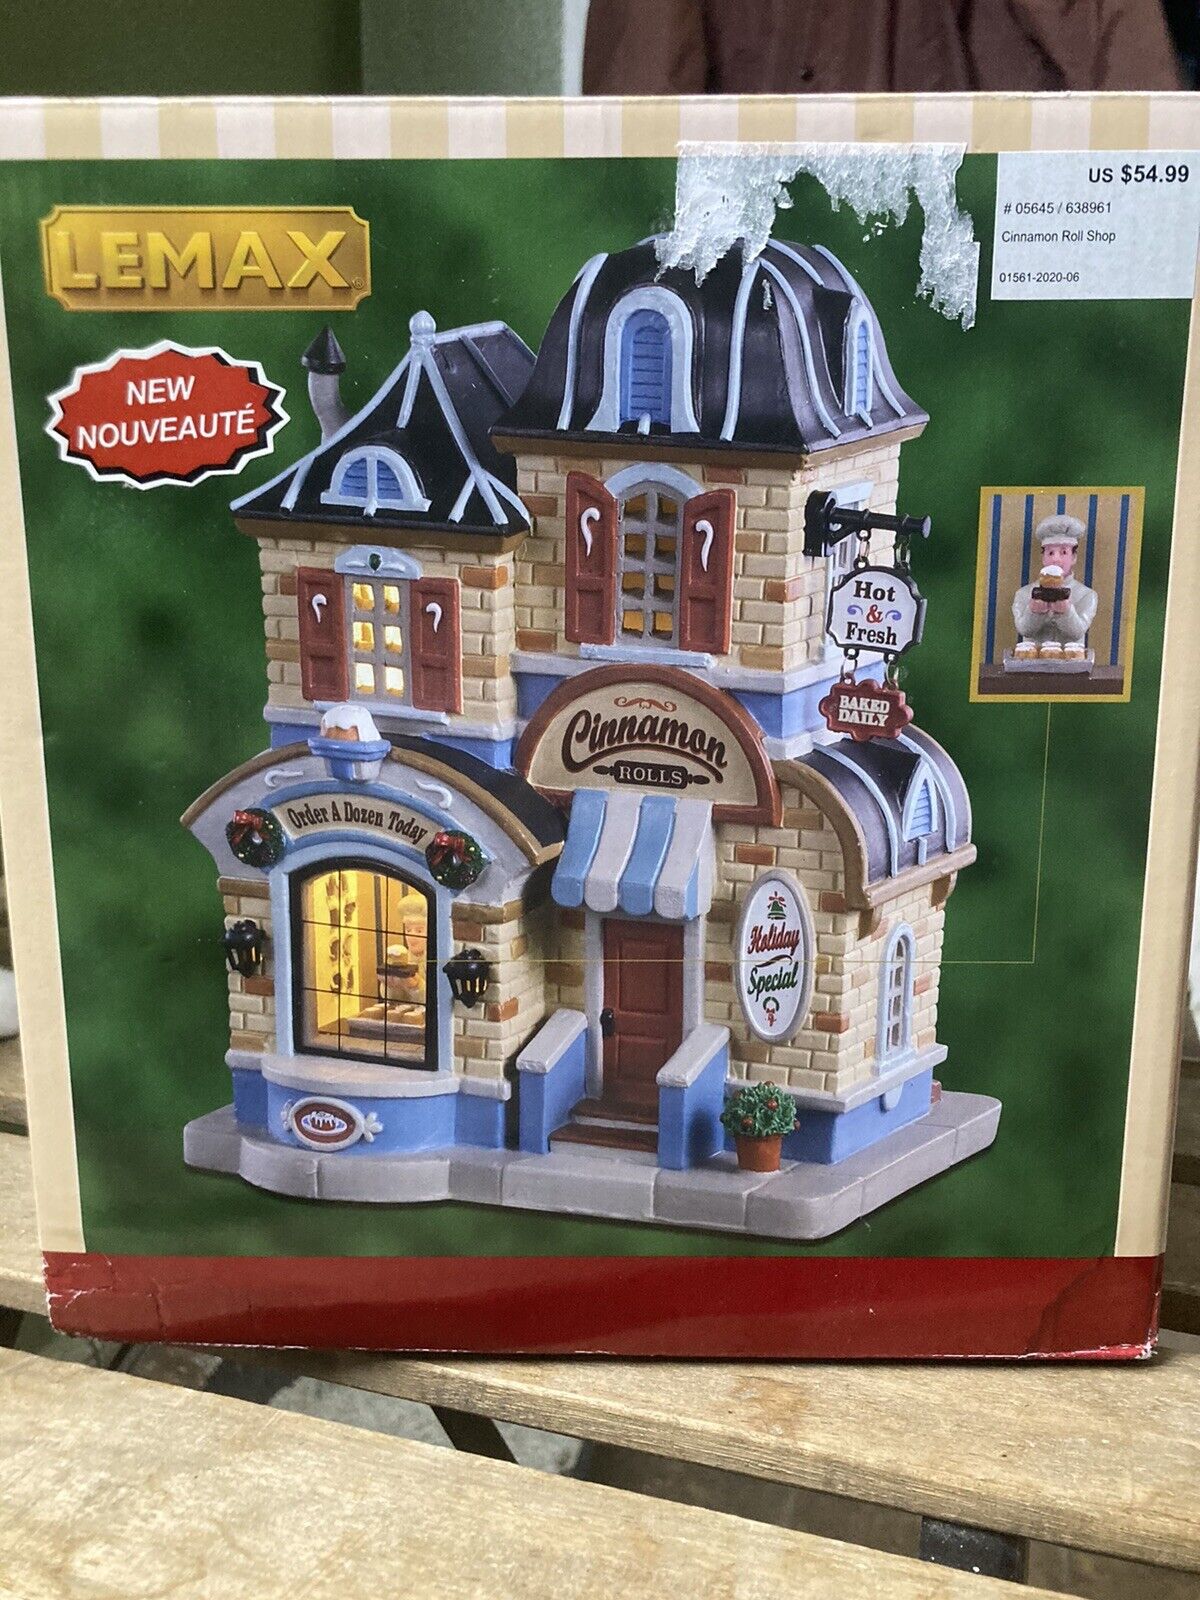 NEW 2020 LEMAX CINNAMON ROLL SHOP LIGHTED BUILDING #05645